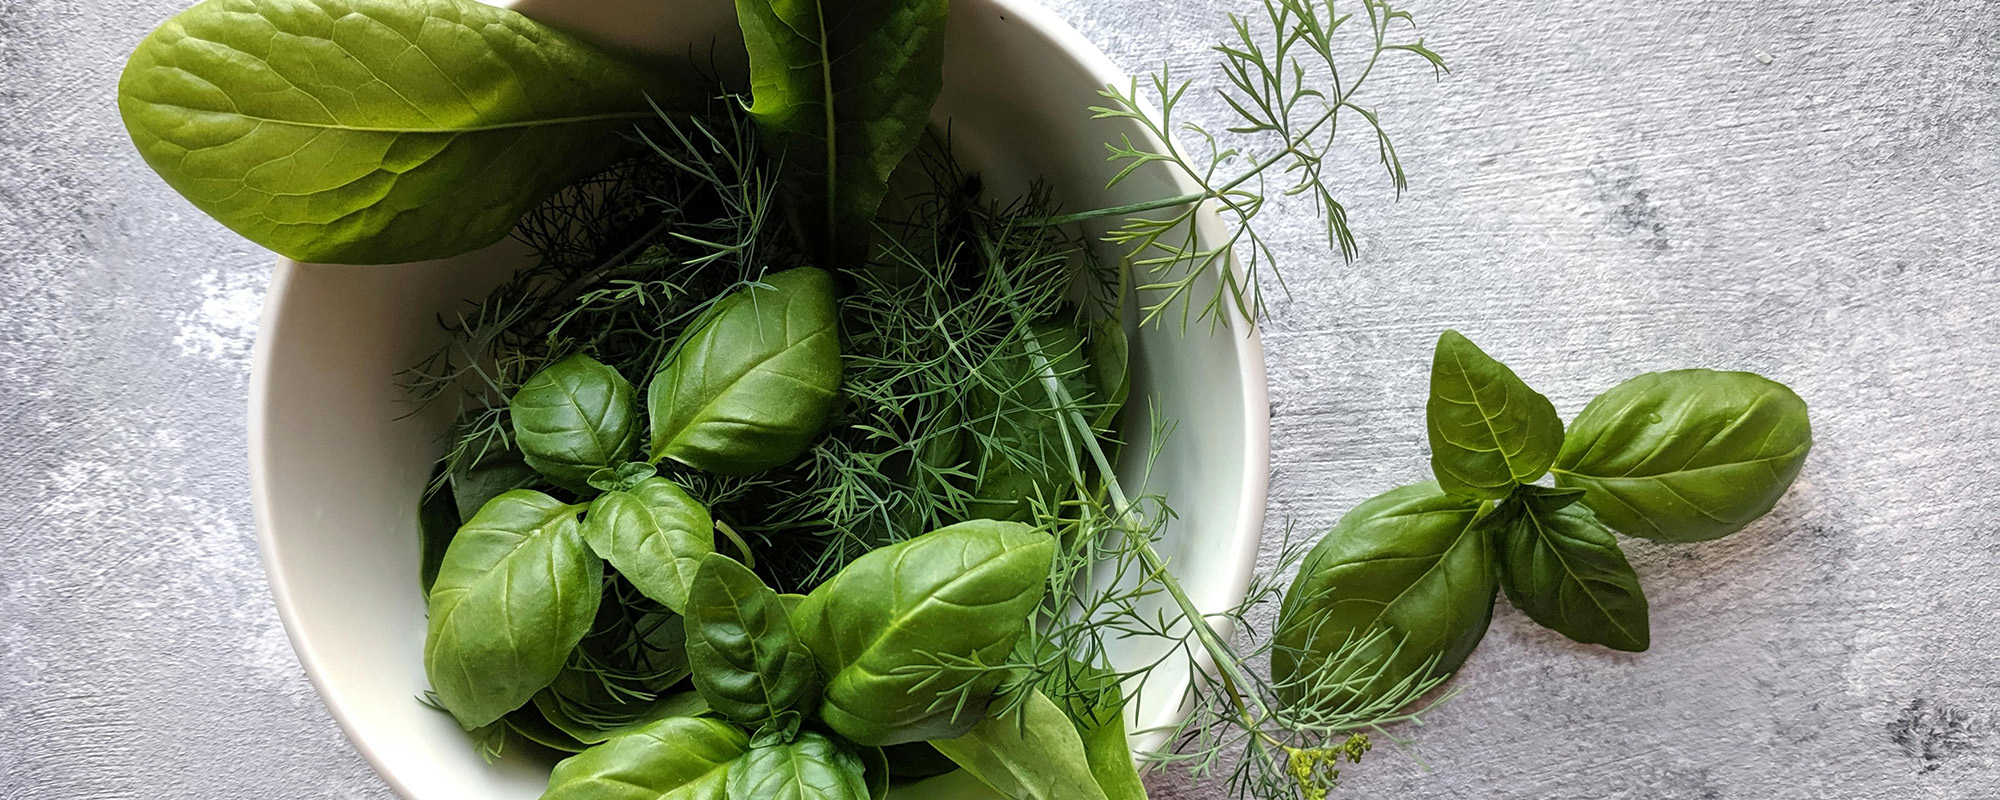 Community Education Classes Growing Culinary Herbs